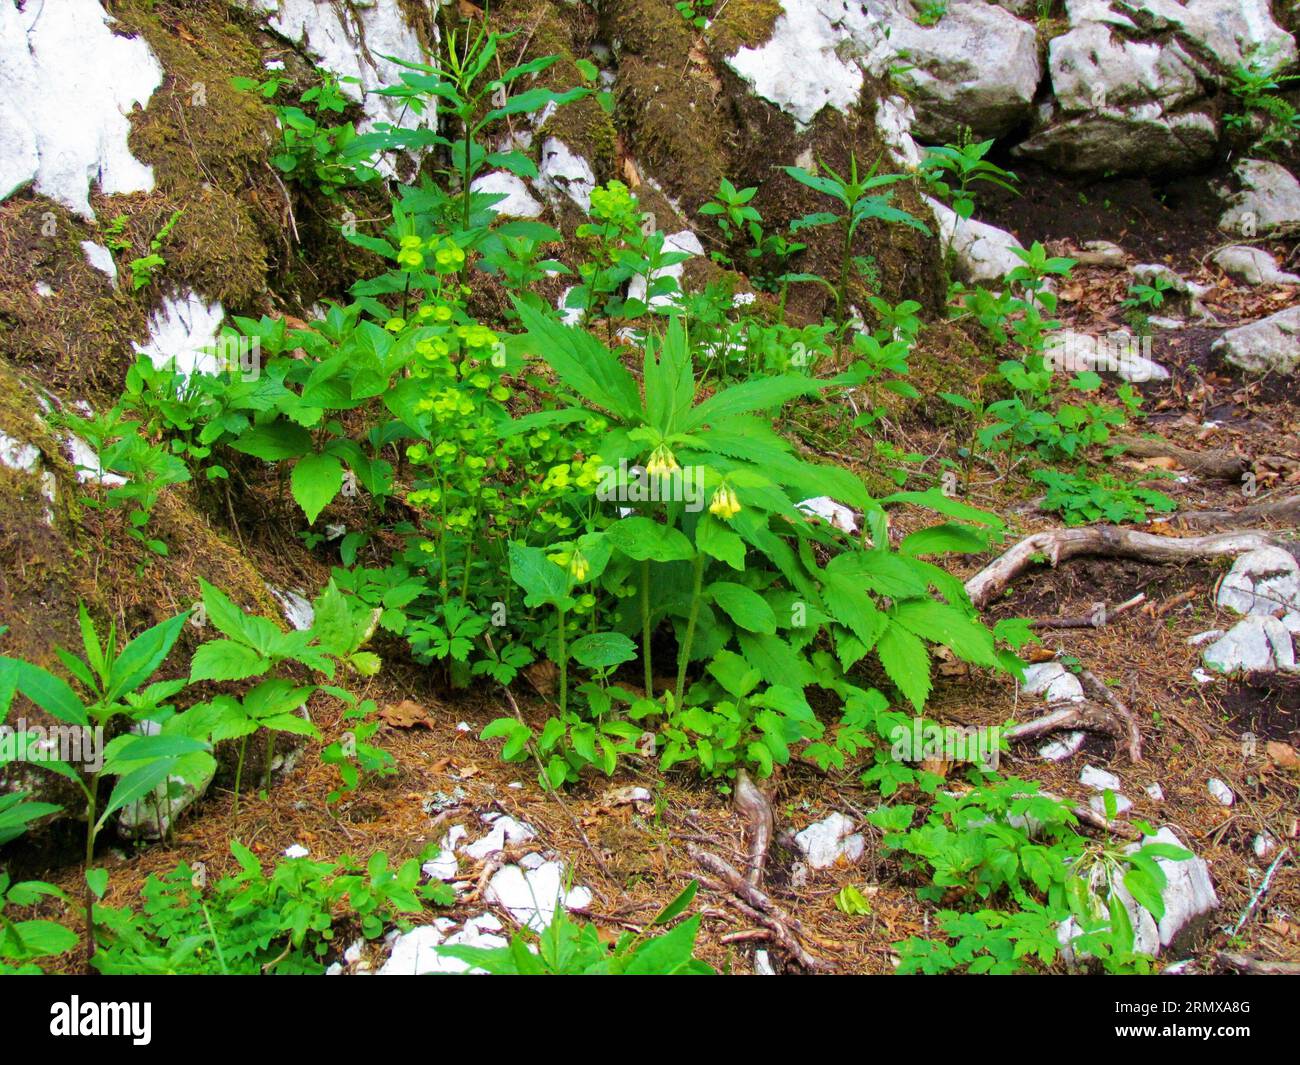 Garden of drooping bittercress (Cardamine enneaphyllos) and spurge (Euphorbia spp.) plants in the spring Stock Photo